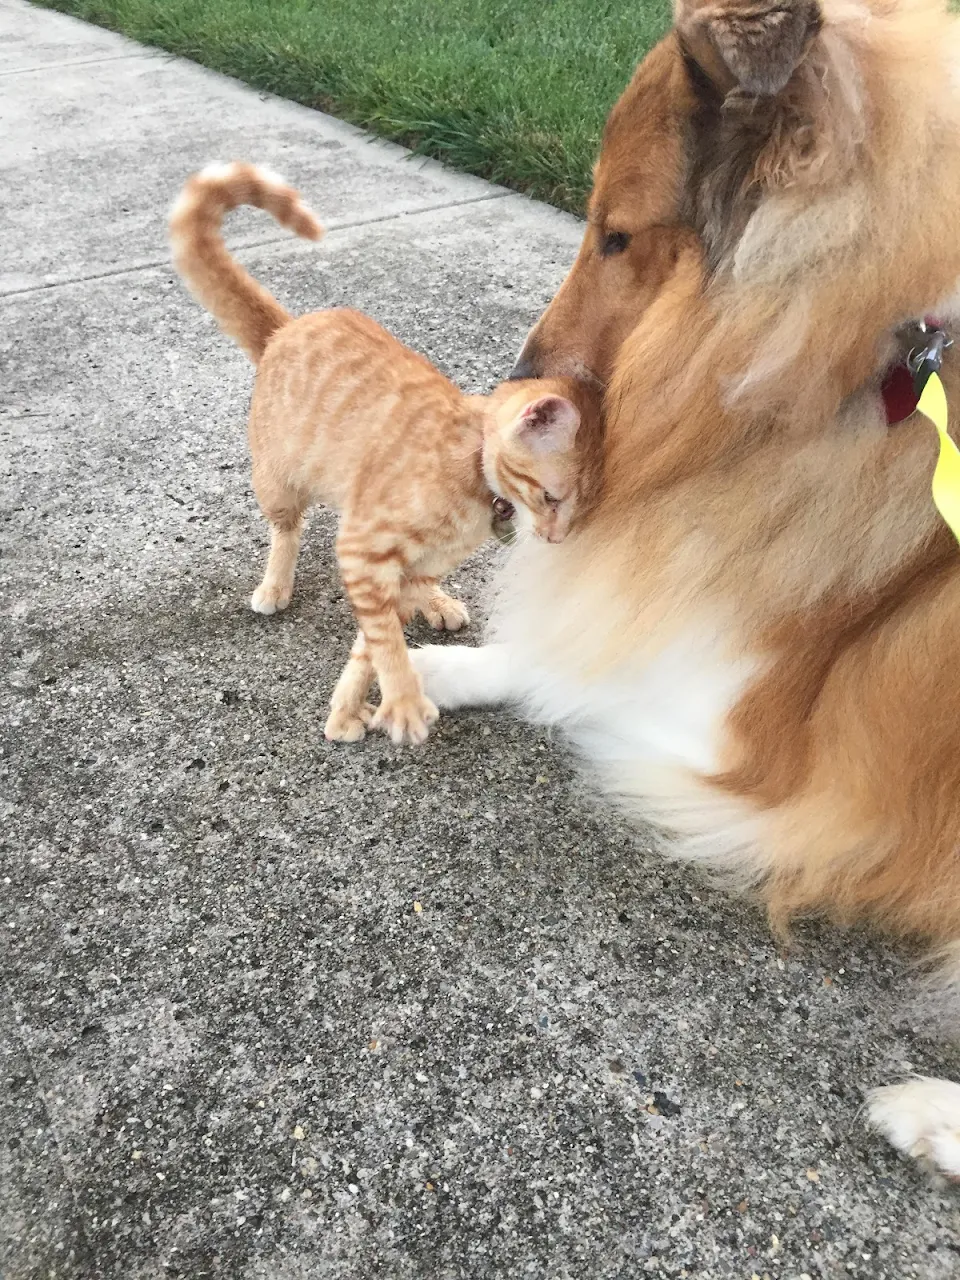 Our dog is gentle with all cats in the neighborhood